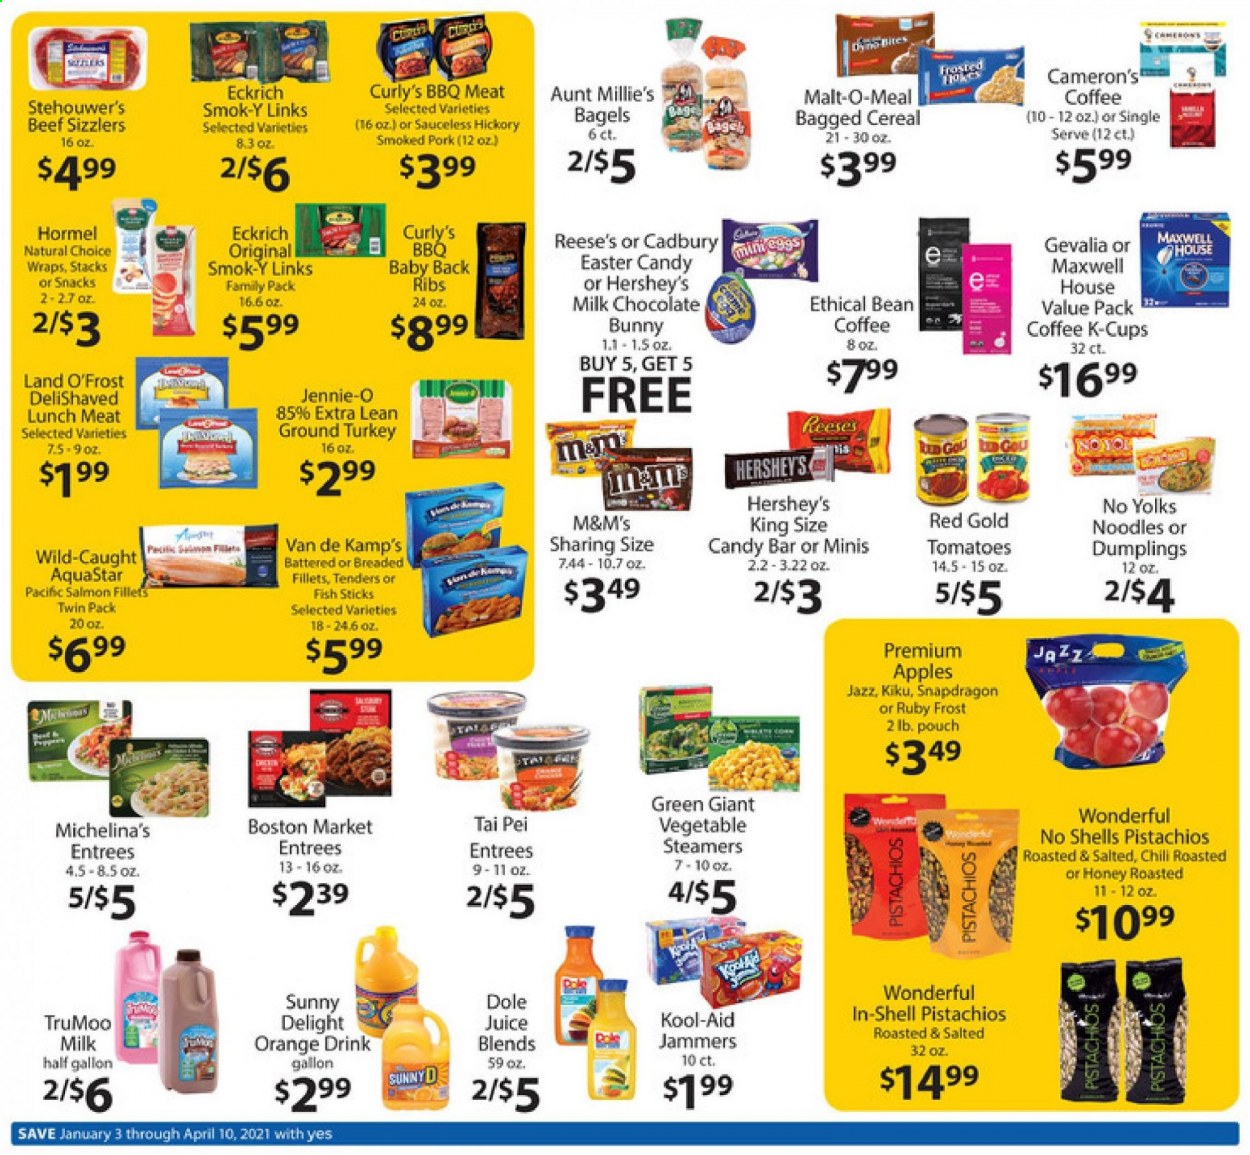 thumbnail - Family Fare Flyer - 01/03/2021 - 04/10/2021 - Sales products - bagels, bread, wraps, tomatoes, Dole, apples, oranges, salmon, salmon fillet, fish fingers, Van de Kamp's, fish sticks, dumplings, noodles, Hormel, lunch meat, Reese's, Hershey's, milk chocolate, chocolate, M&M's, Cadbury, chocolate bunny, snack, malt, cereals, pistachios, juice, Maxwell House, coffee, coffee capsules, K-Cups, Gevalia, ground turkey, pork meat, pork back ribs. Page 2.